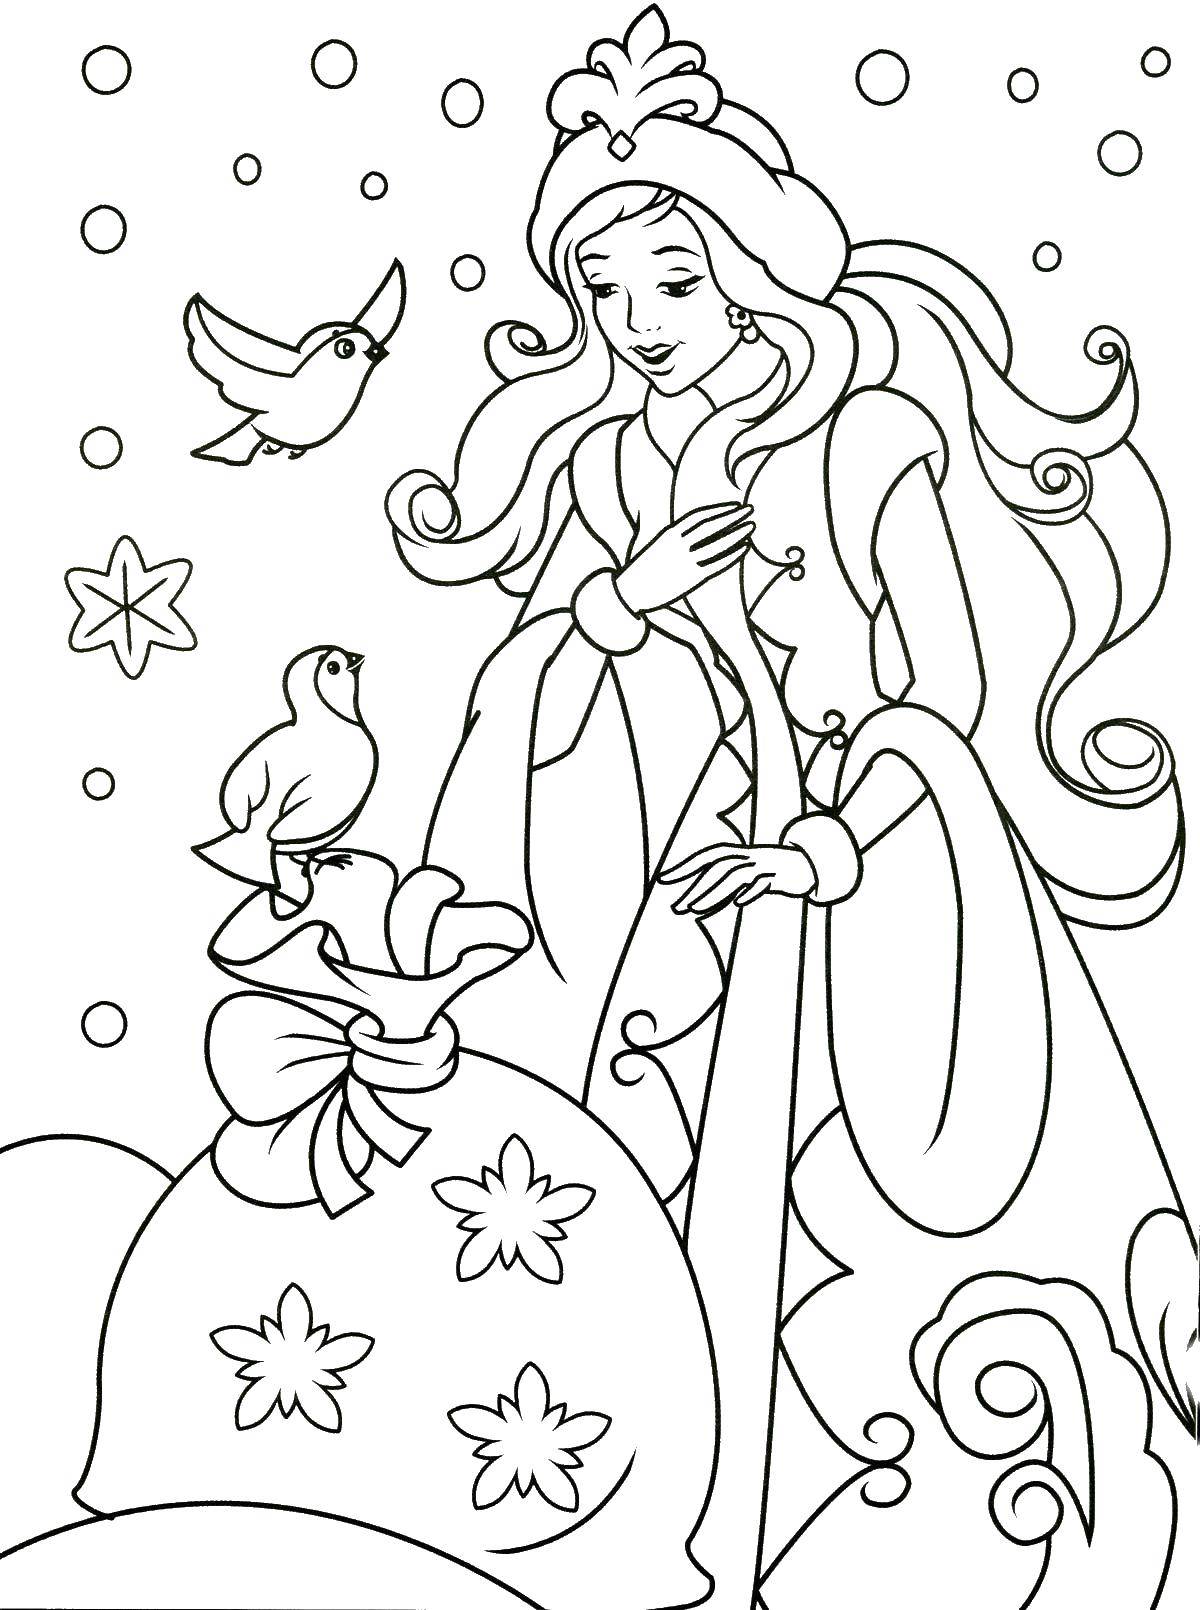 Coloring The snow maiden with a bag of gifts. Category winter. Tags:  maiden.